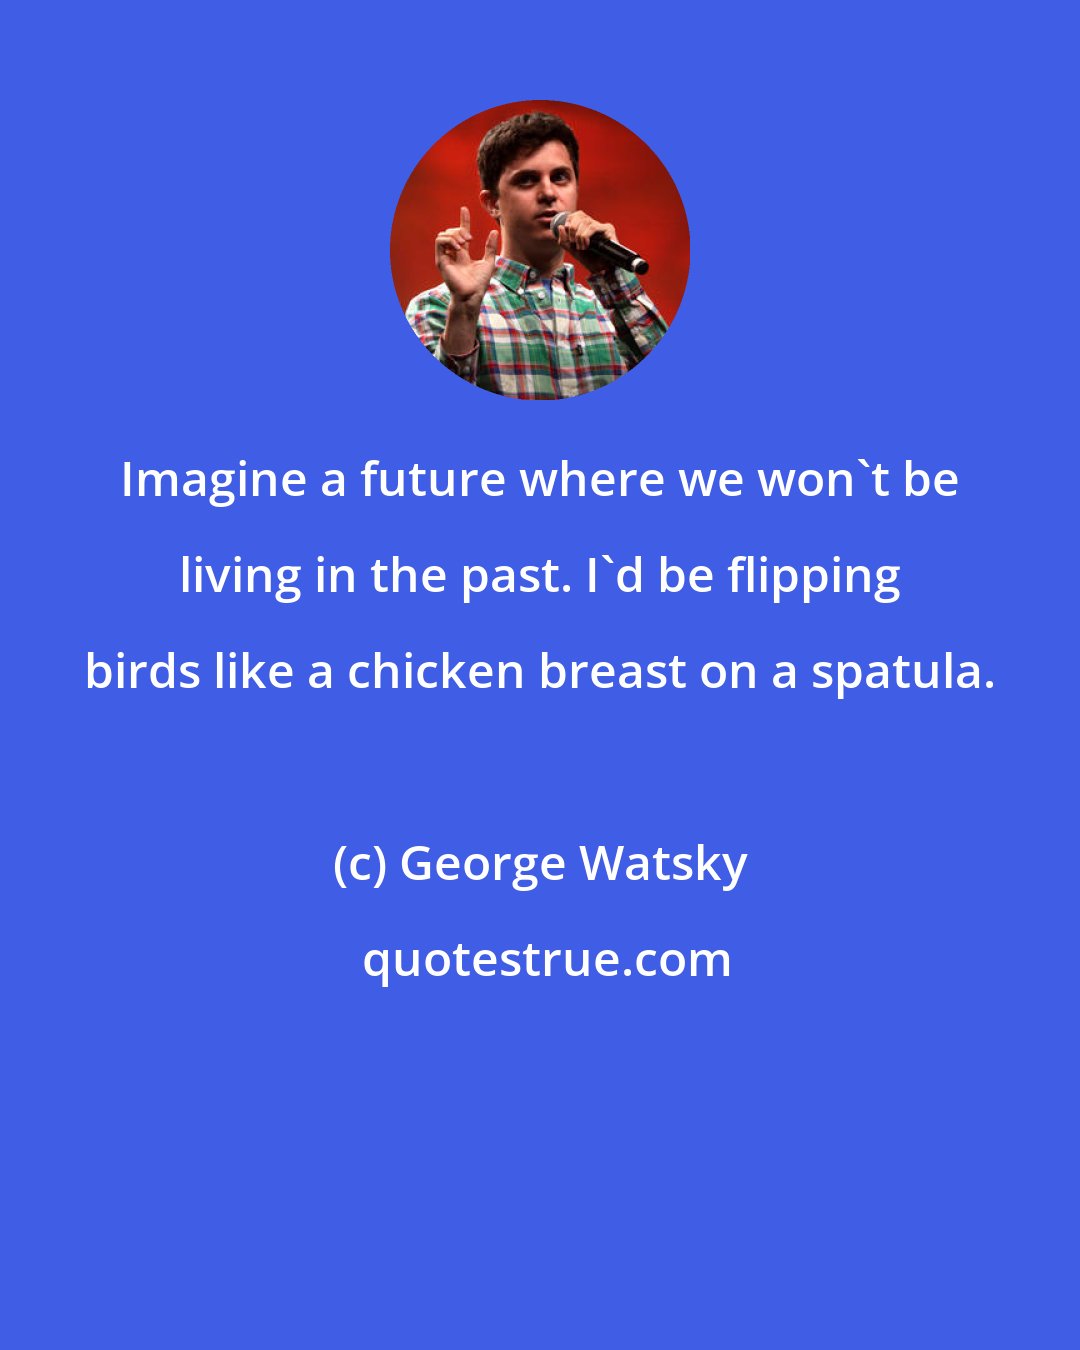 George Watsky: Imagine a future where we won't be living in the past. I'd be flipping birds like a chicken breast on a spatula.